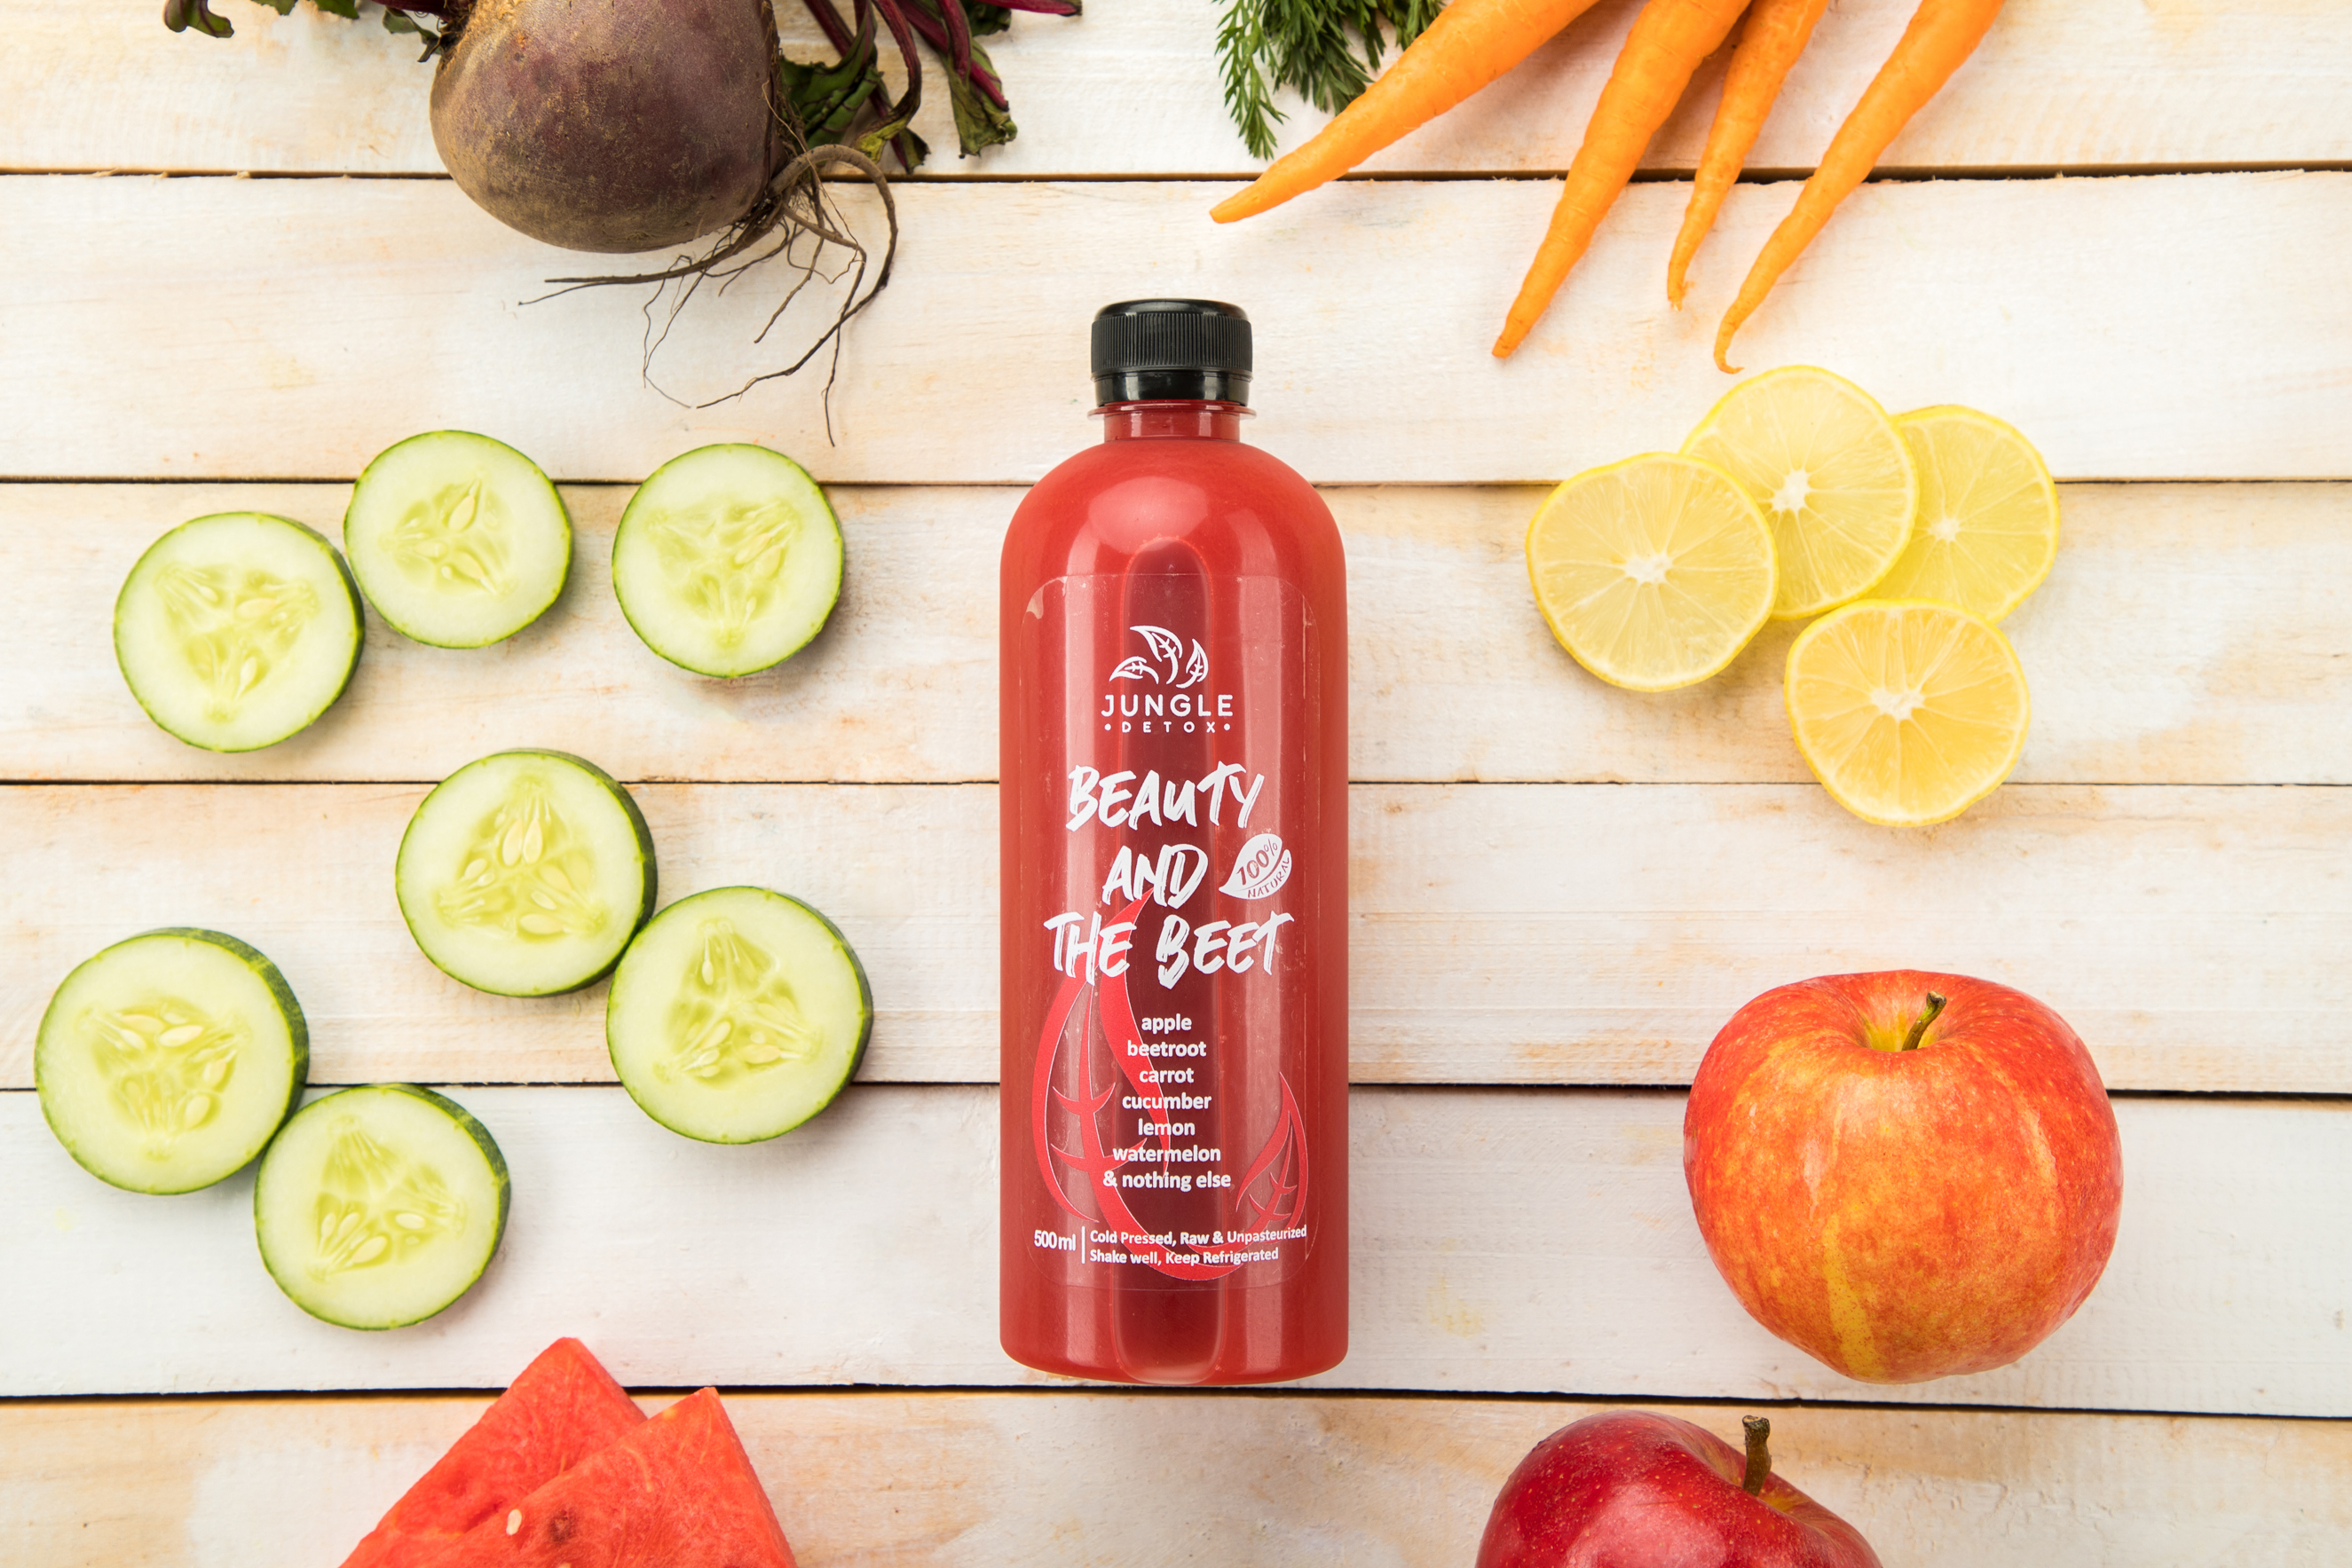 Beauty And The Beet | Jungle Detox